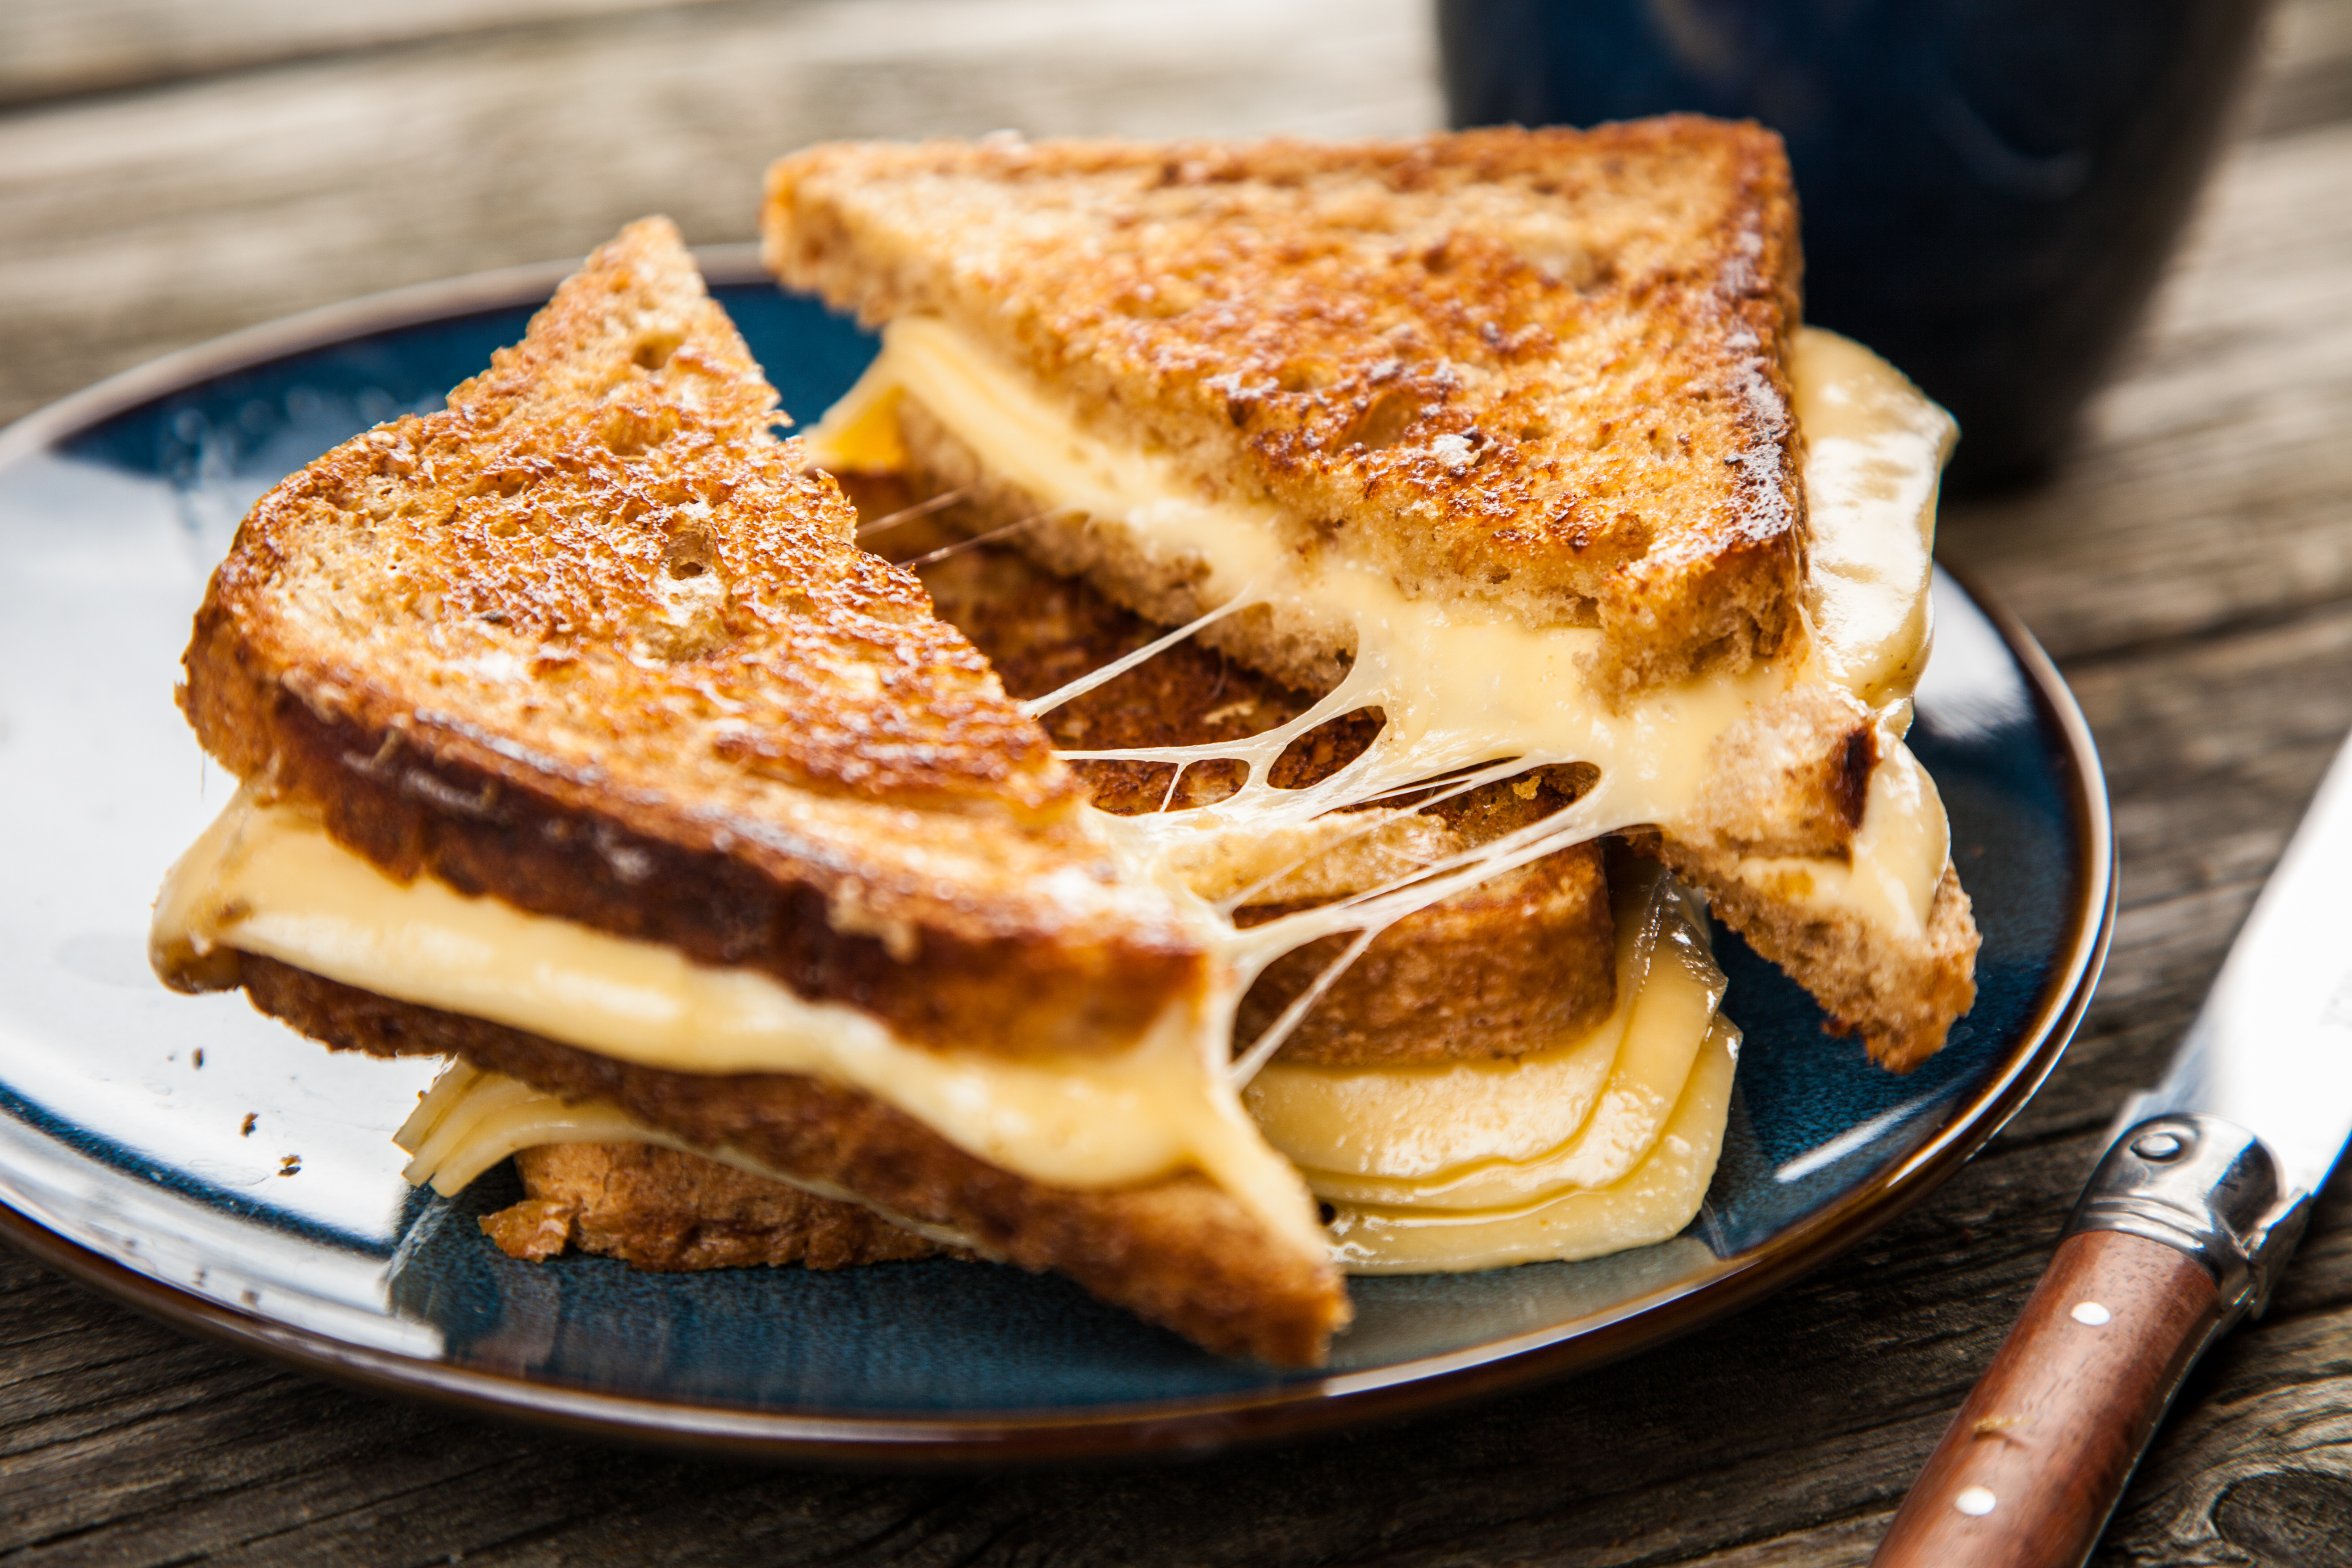 A grilled cheese sandwich | Source: Shutterstock